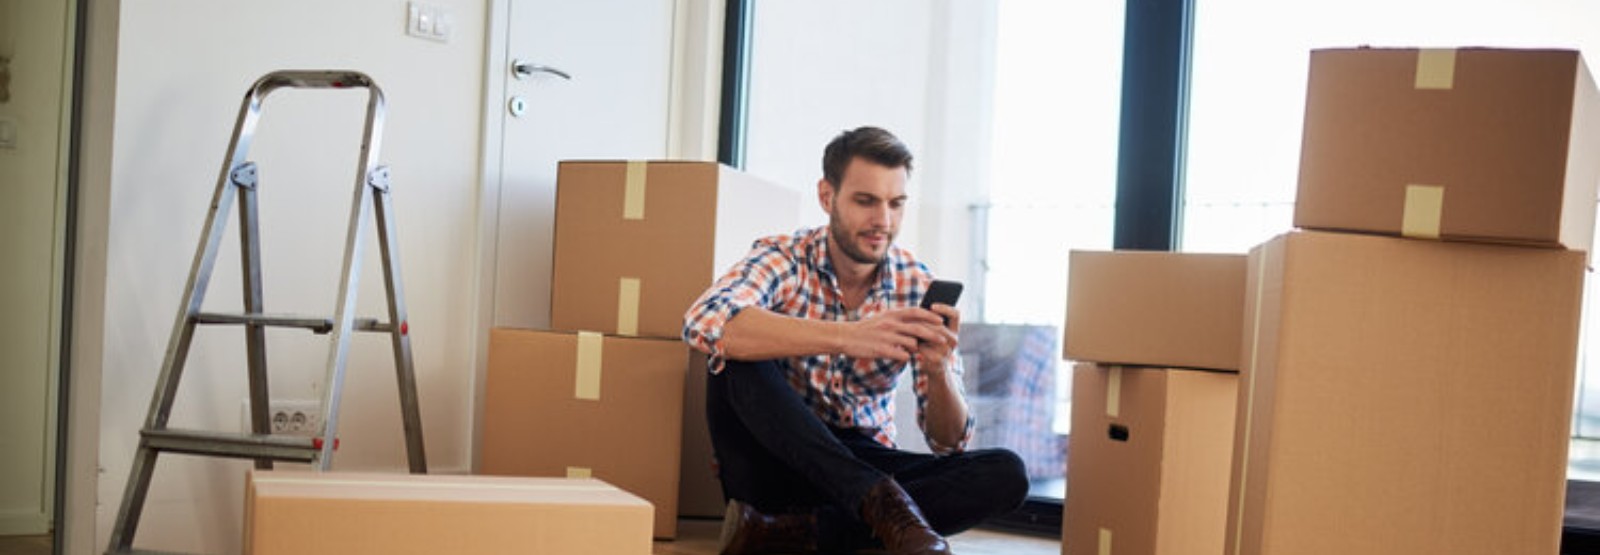 man looking at his smart phone in his new home surrounded by boxes